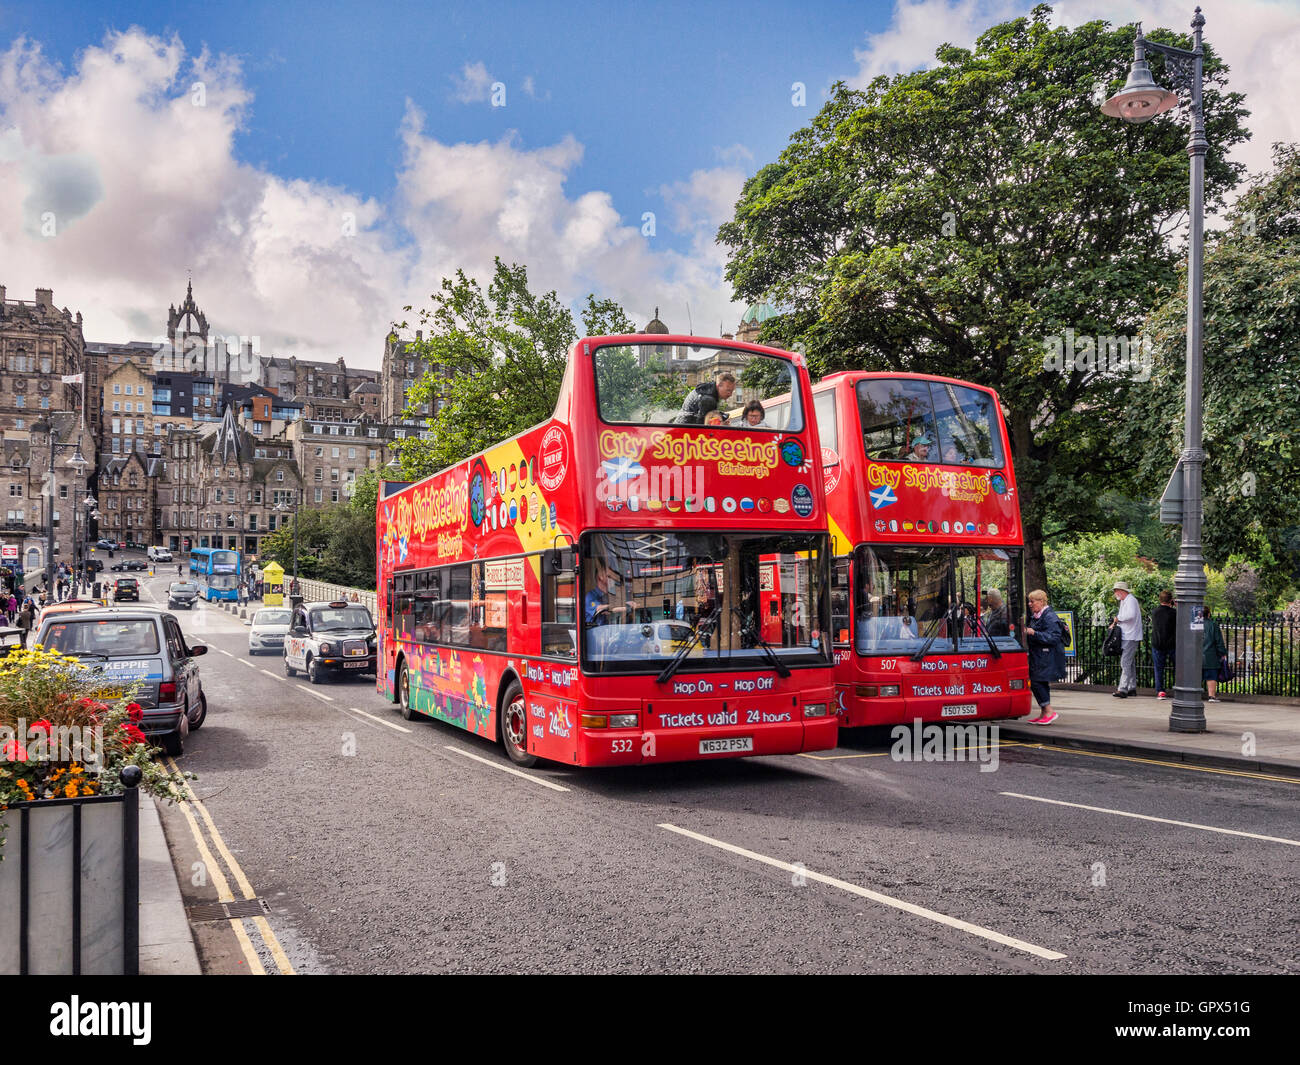 Two City Sightseeing tour buses at a bus stop on Waverley Bridge, Edinburgh, one overtaking the other, Scotland, UK Stock Photo